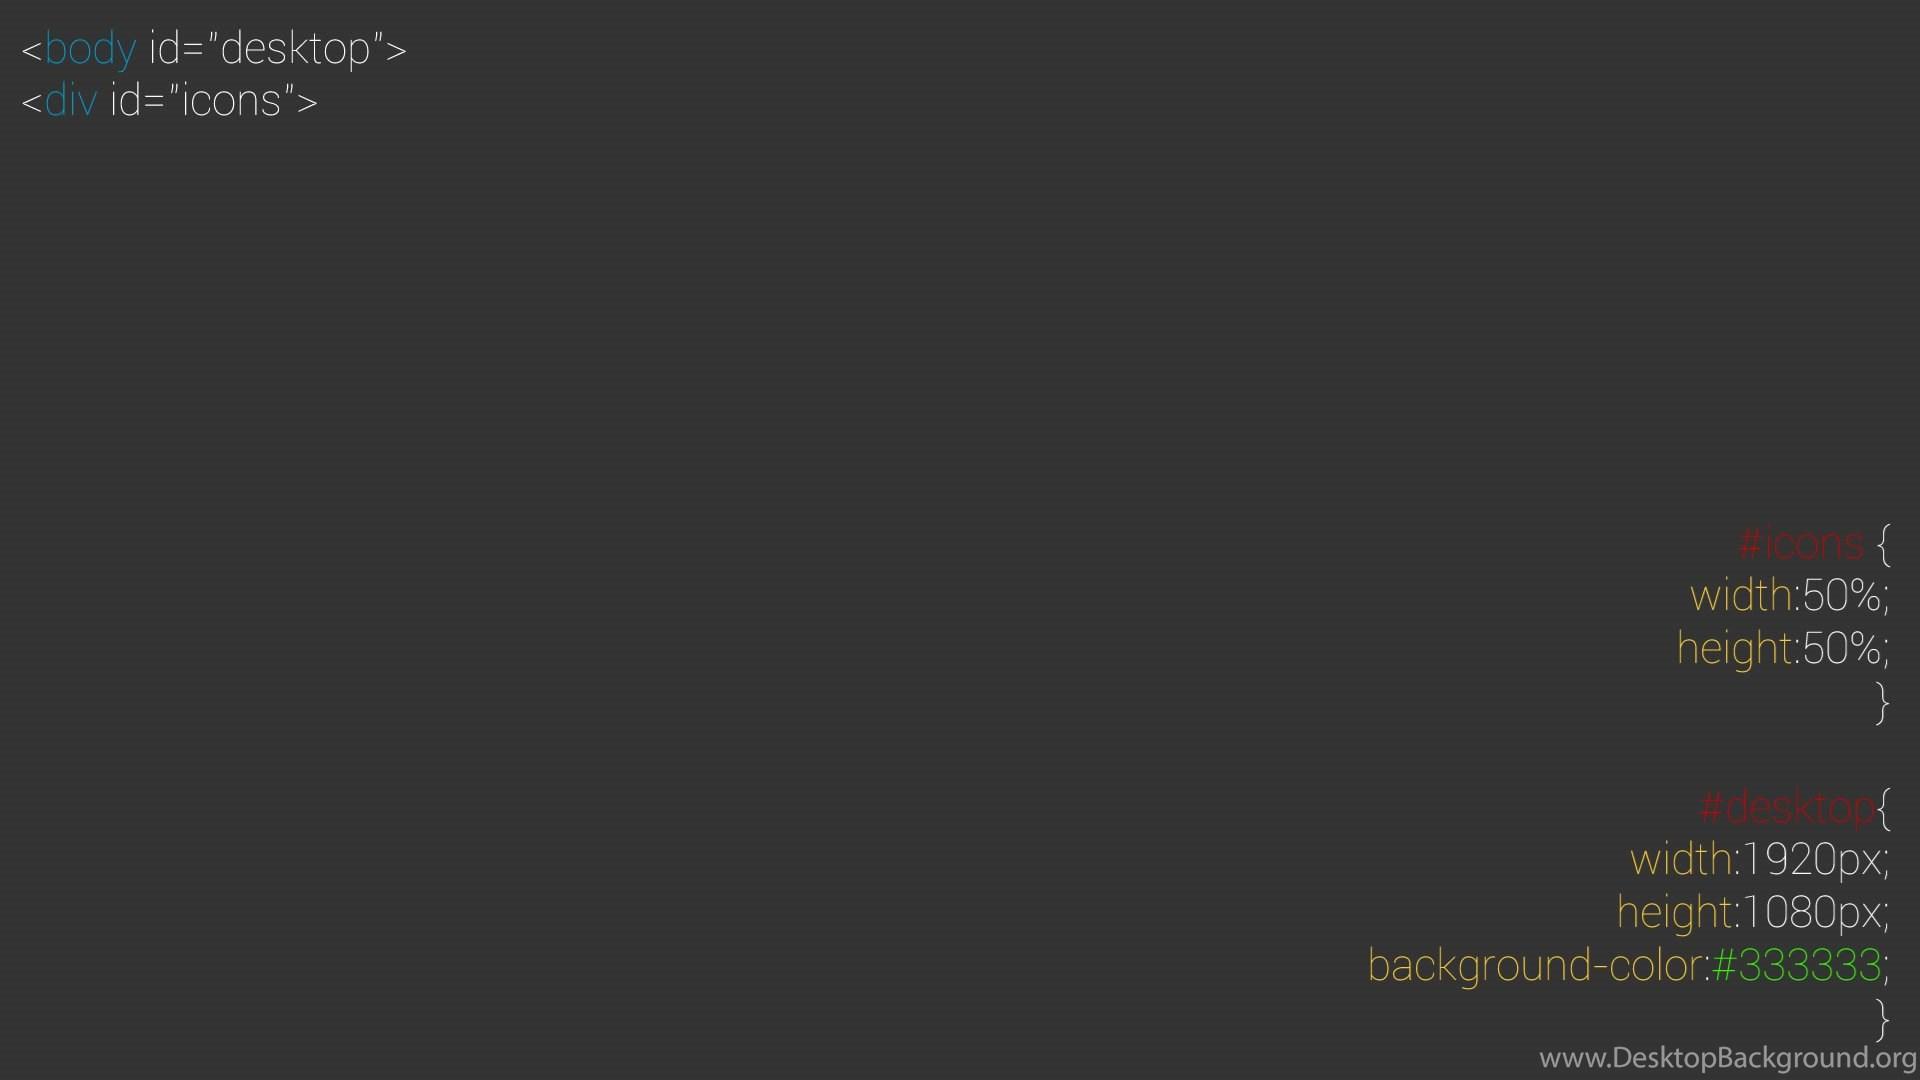 V2]Minimalist, Highlighted HTML CSS Code Style [1920x1080